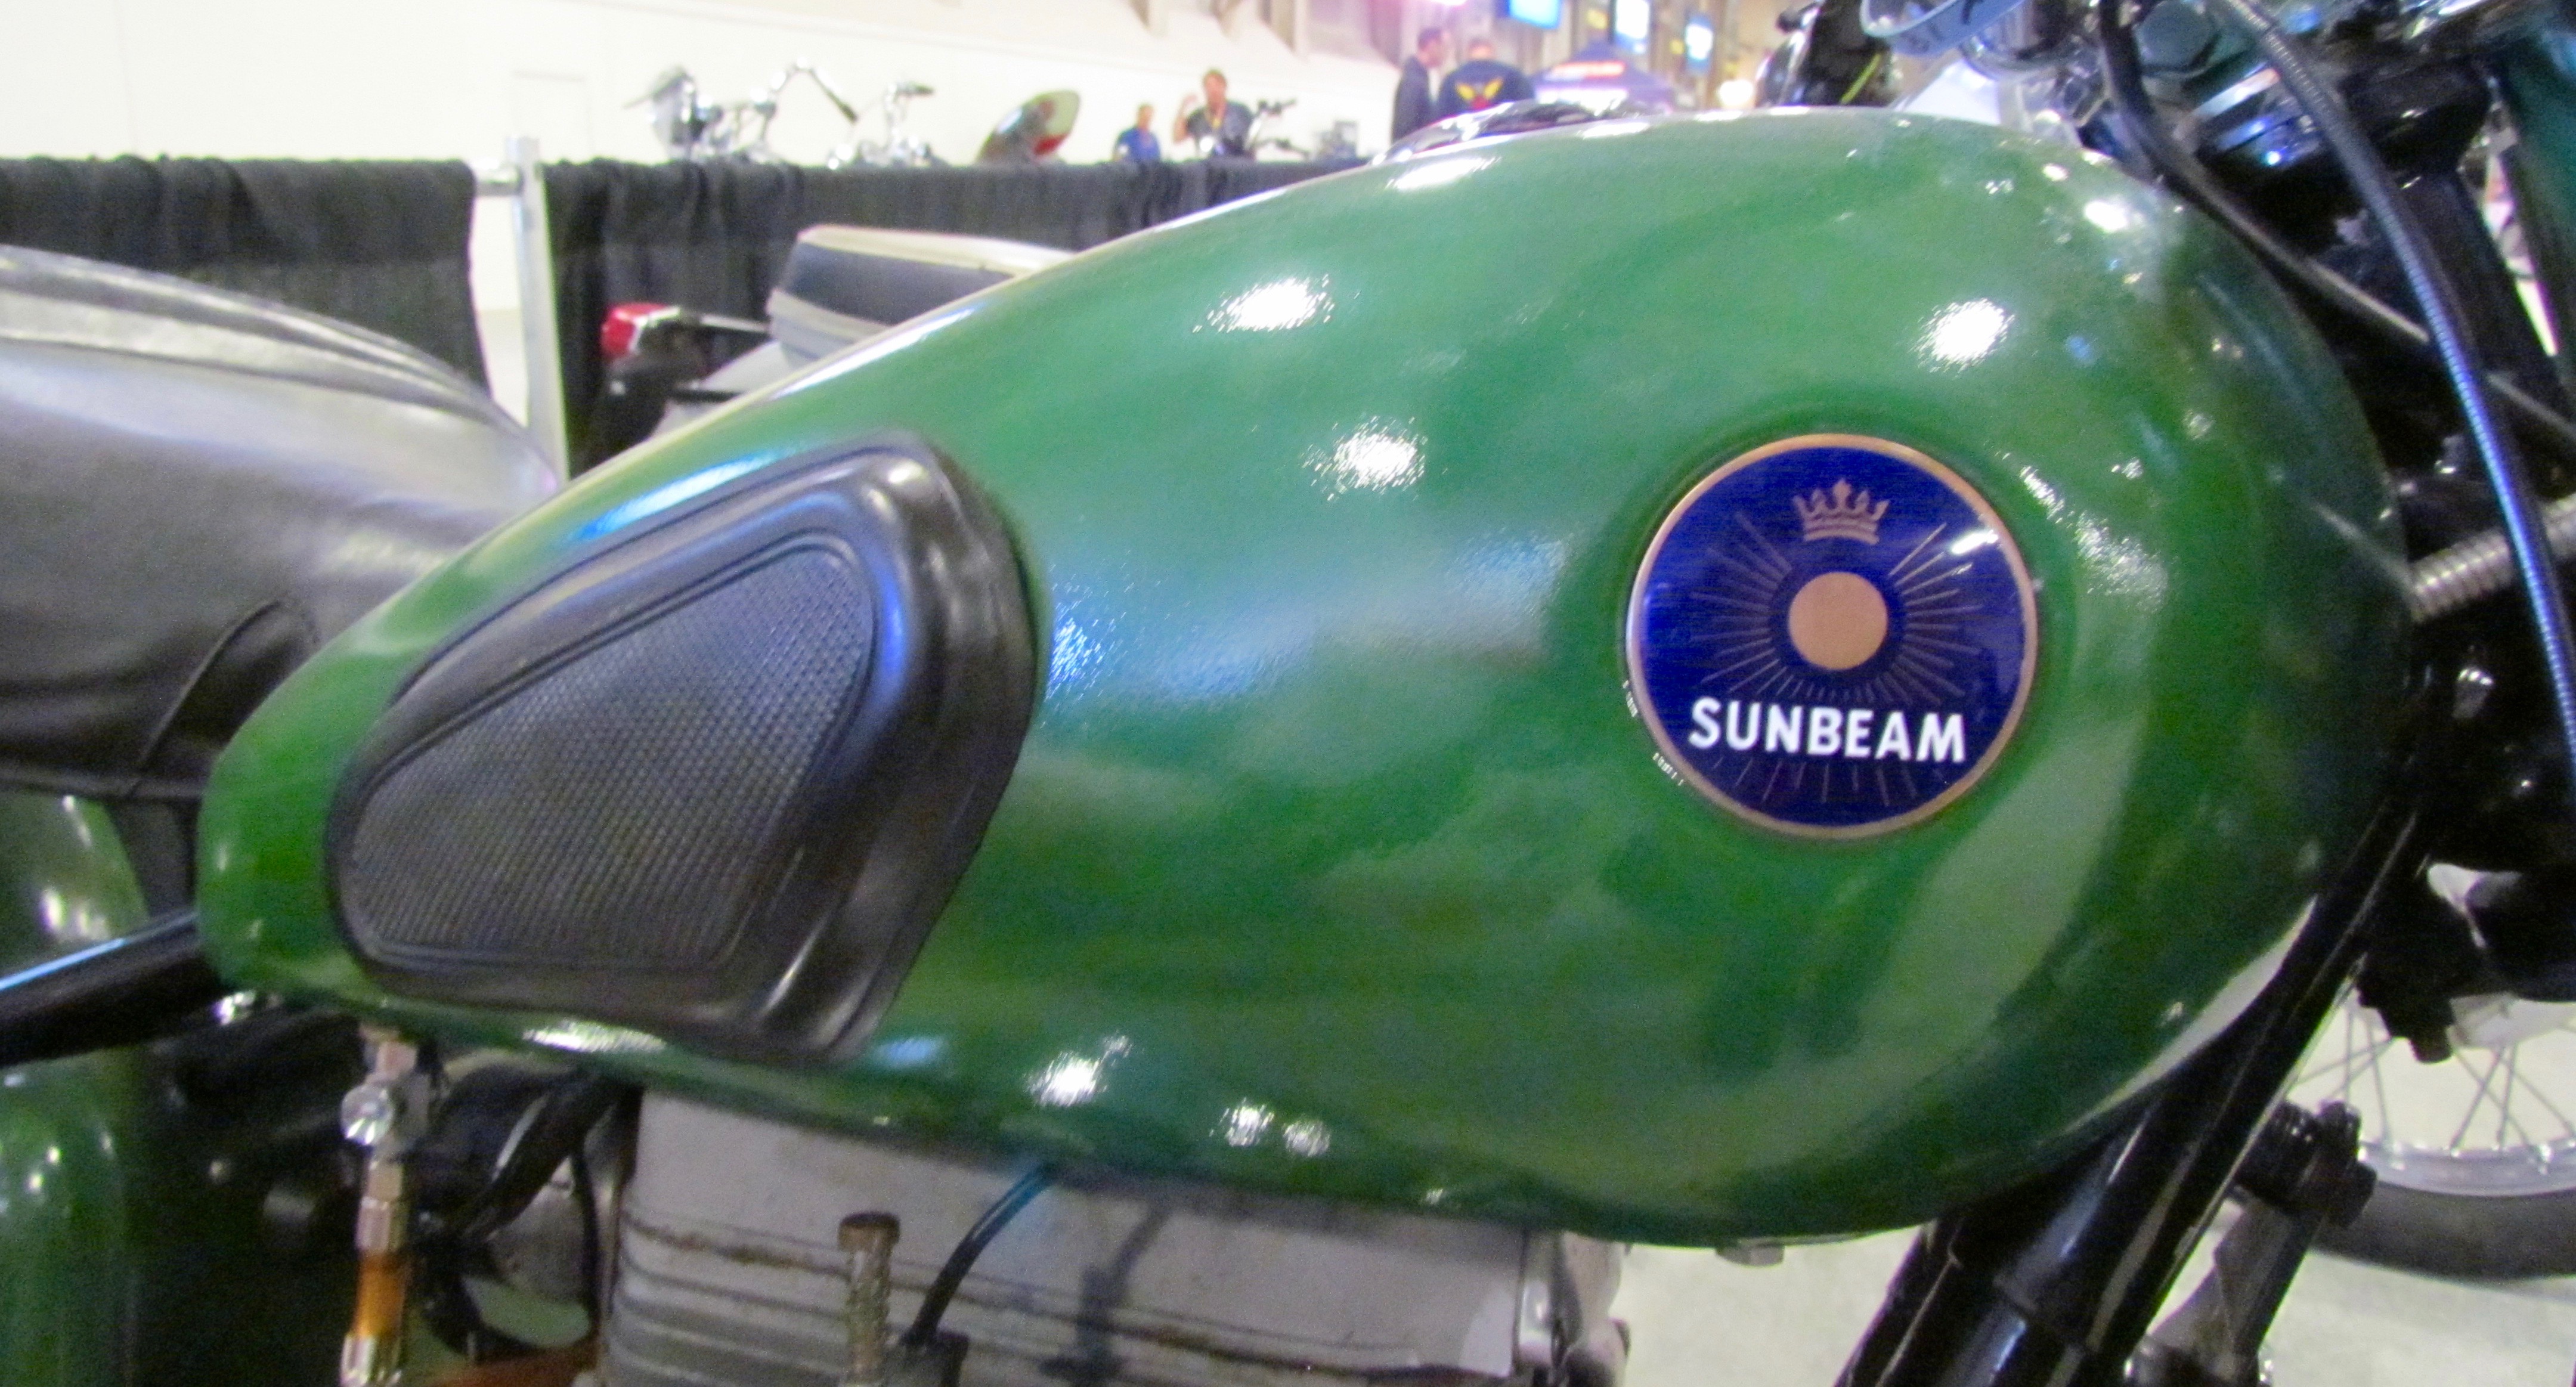 Mecum, Tanks for the memories: Mecum’s motorcycle auction a colorful showcase, ClassicCars.com Journal